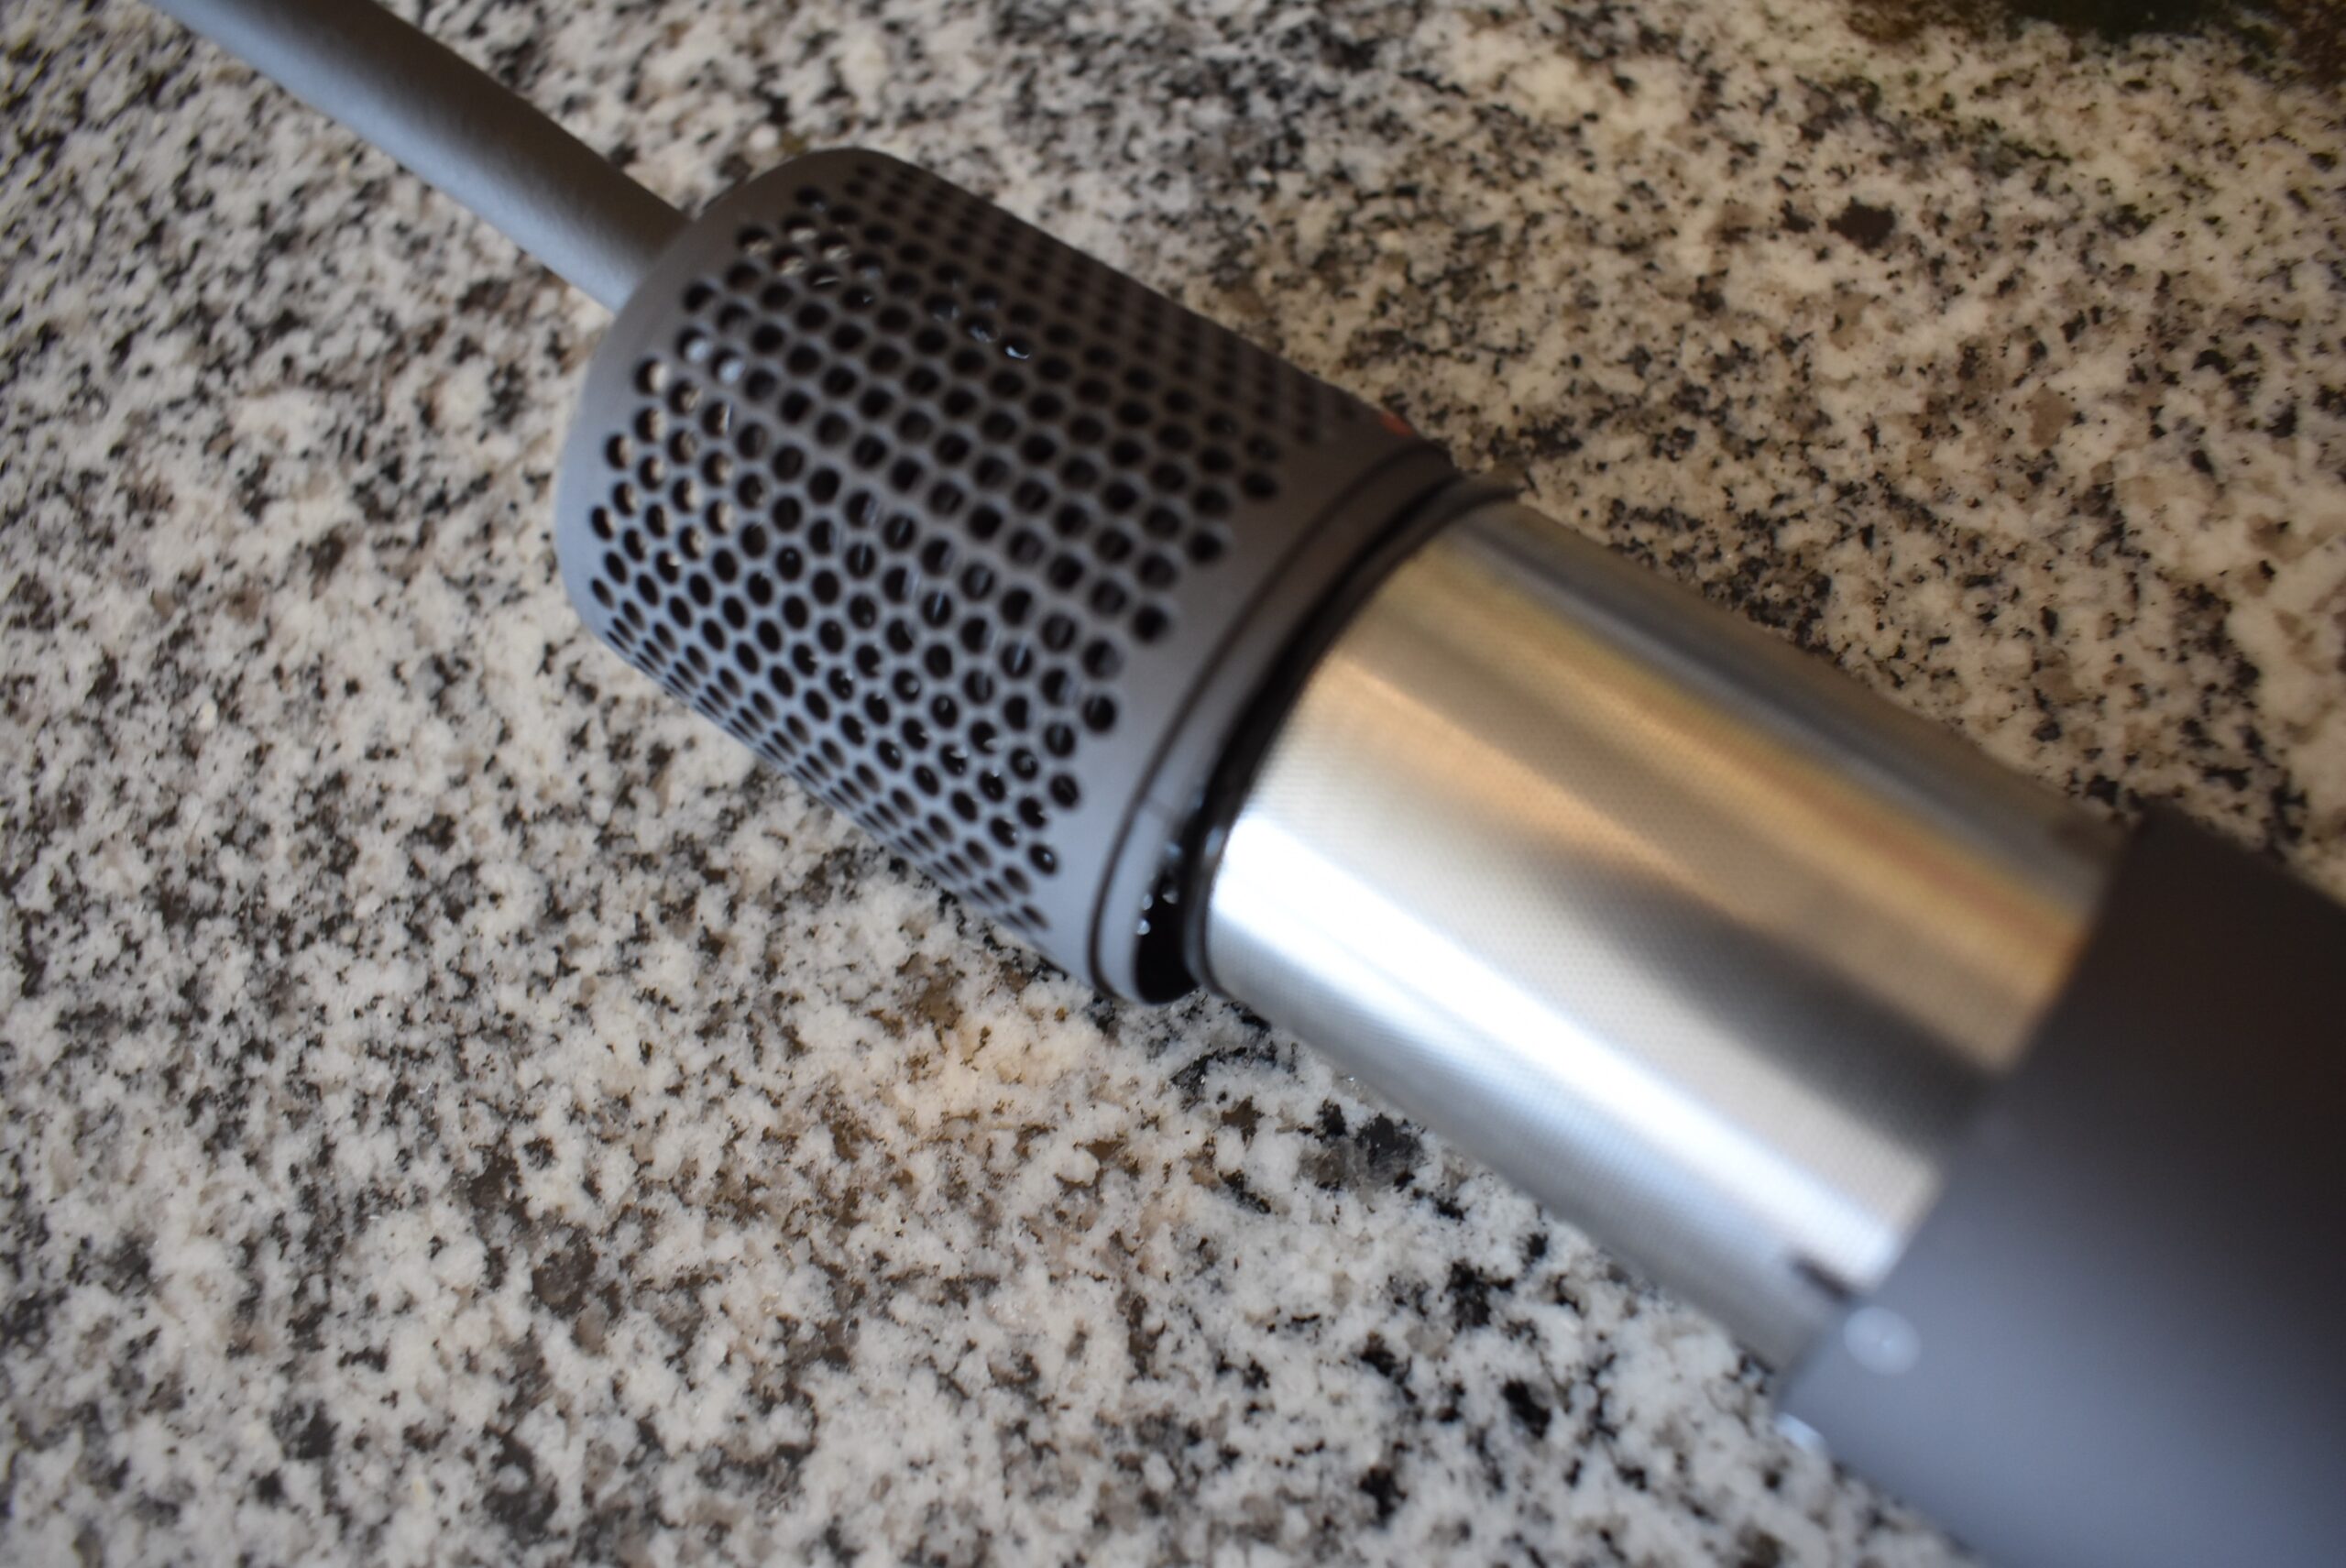 The filter cover close up of a Dyson hair dryer review